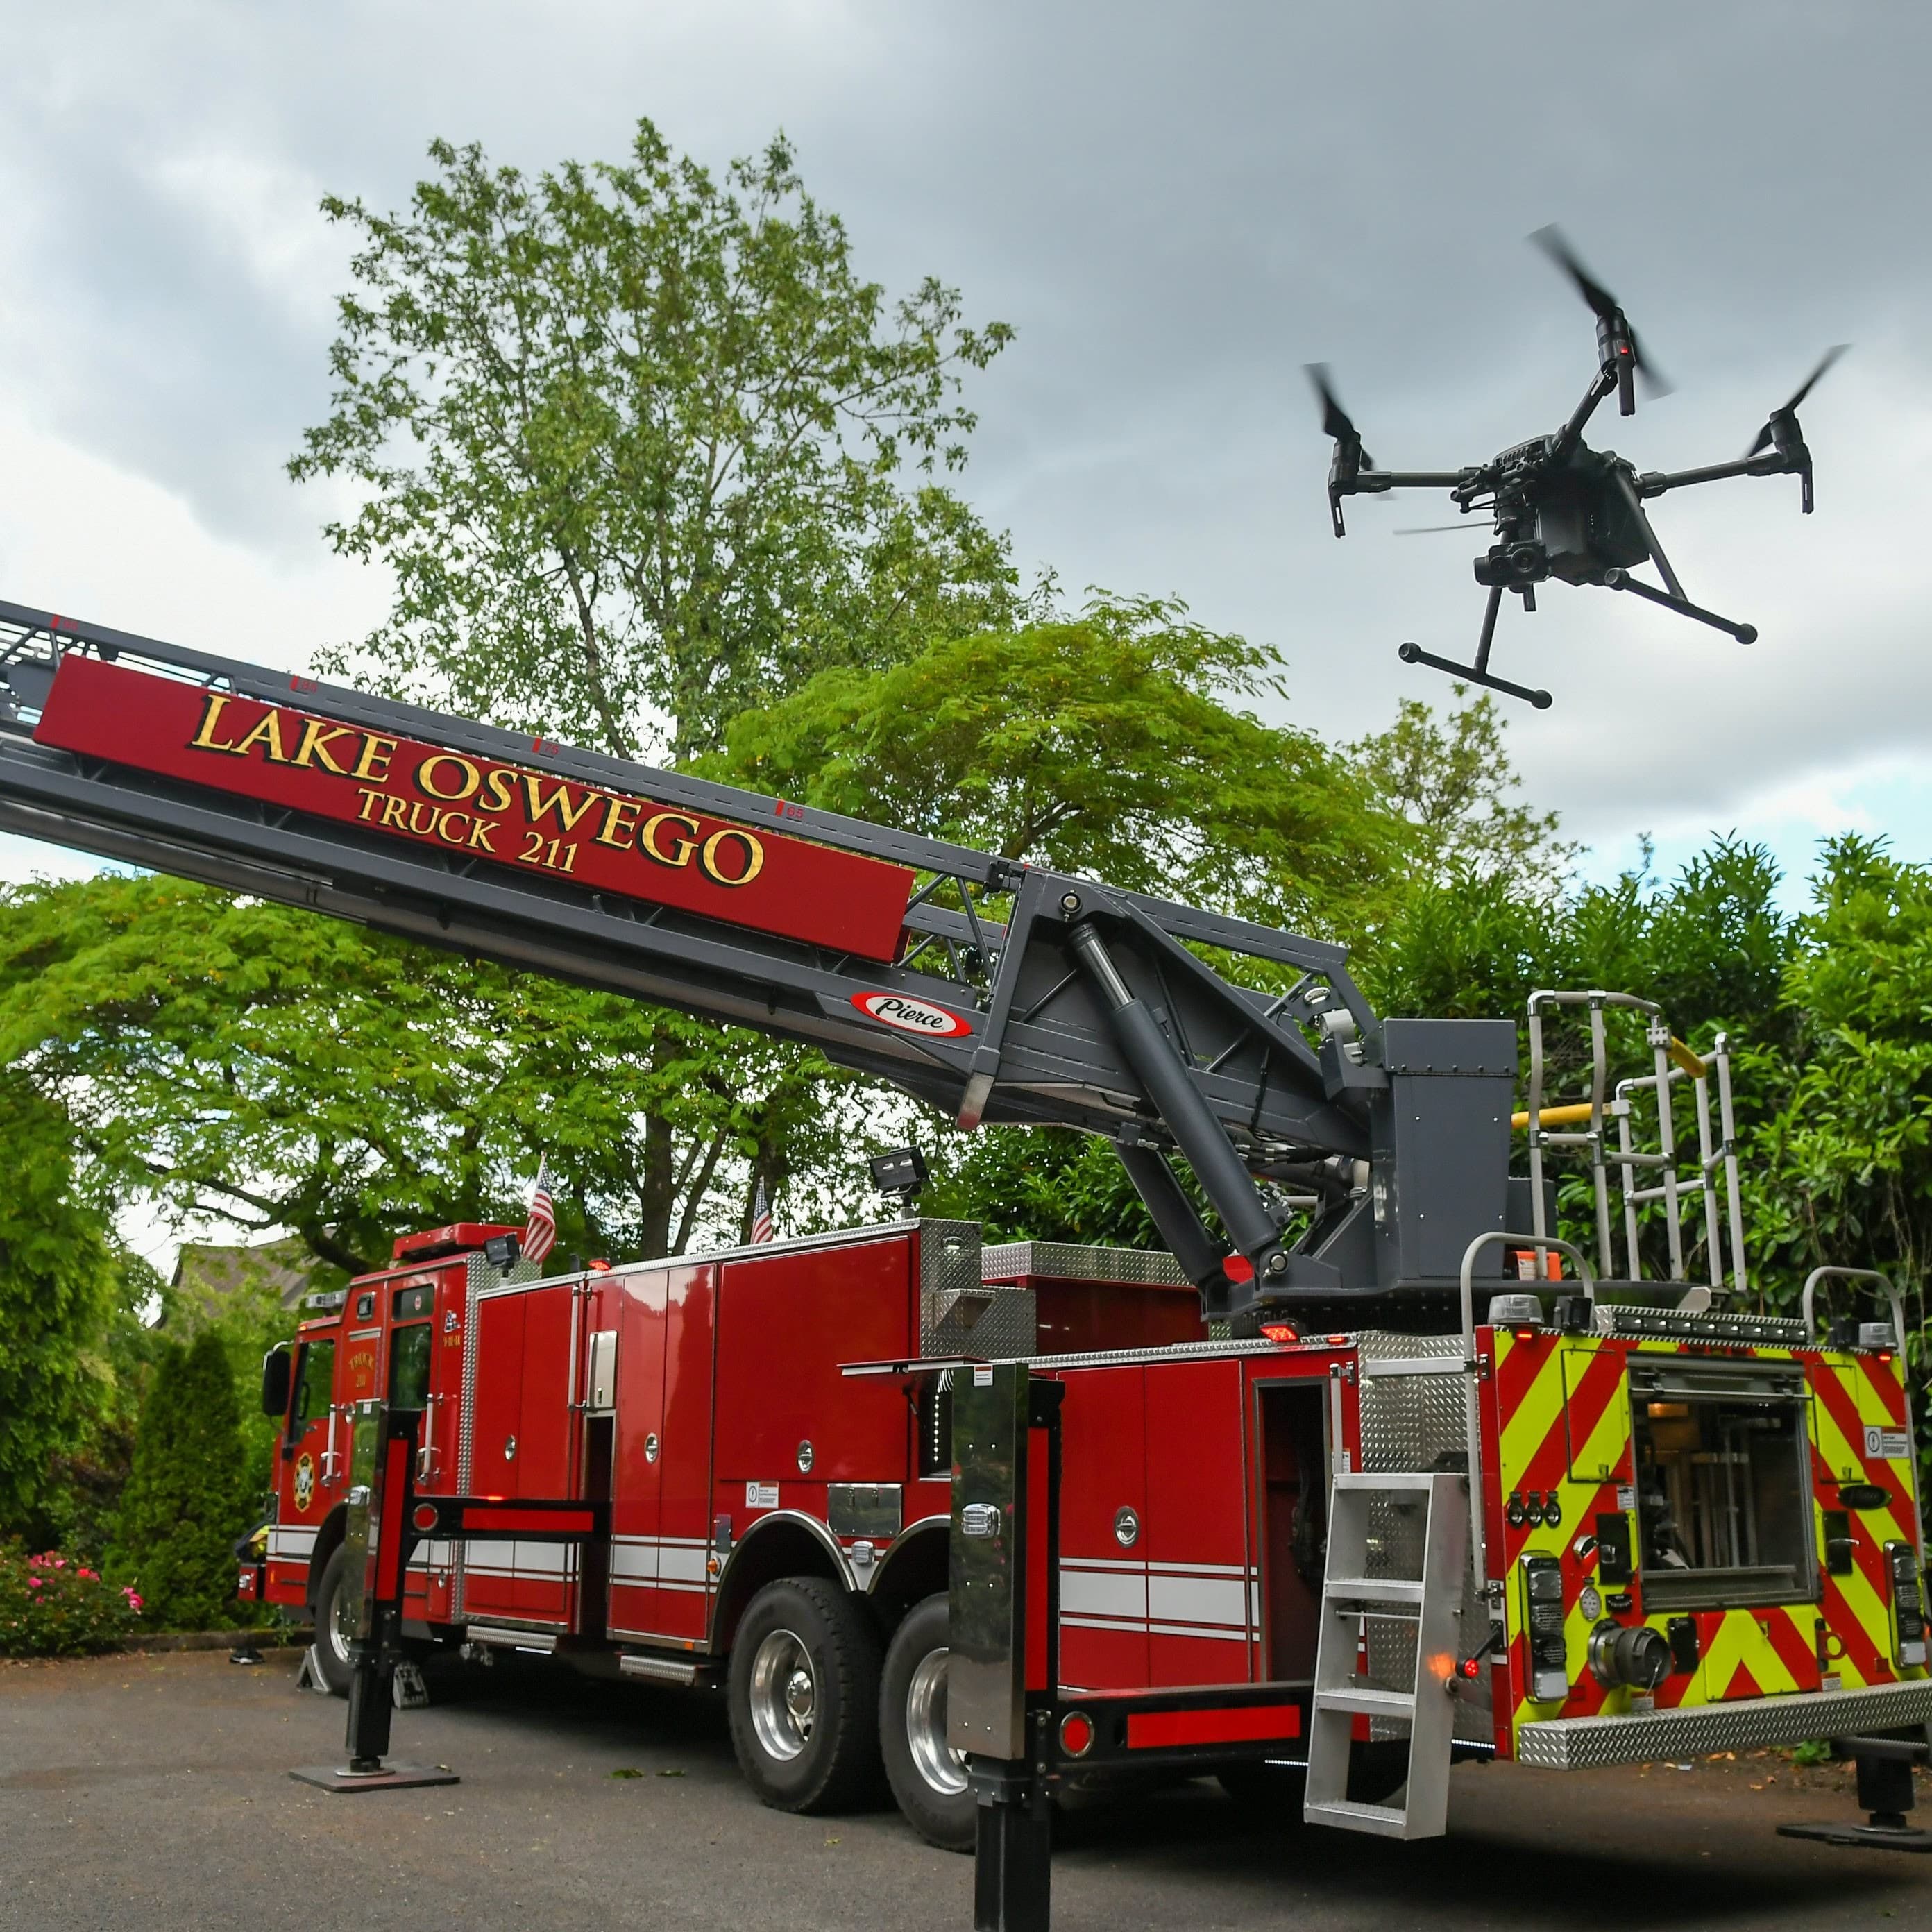 DJI M200 drone with thermal imaging camera working with the Lake Oswego Fire Department